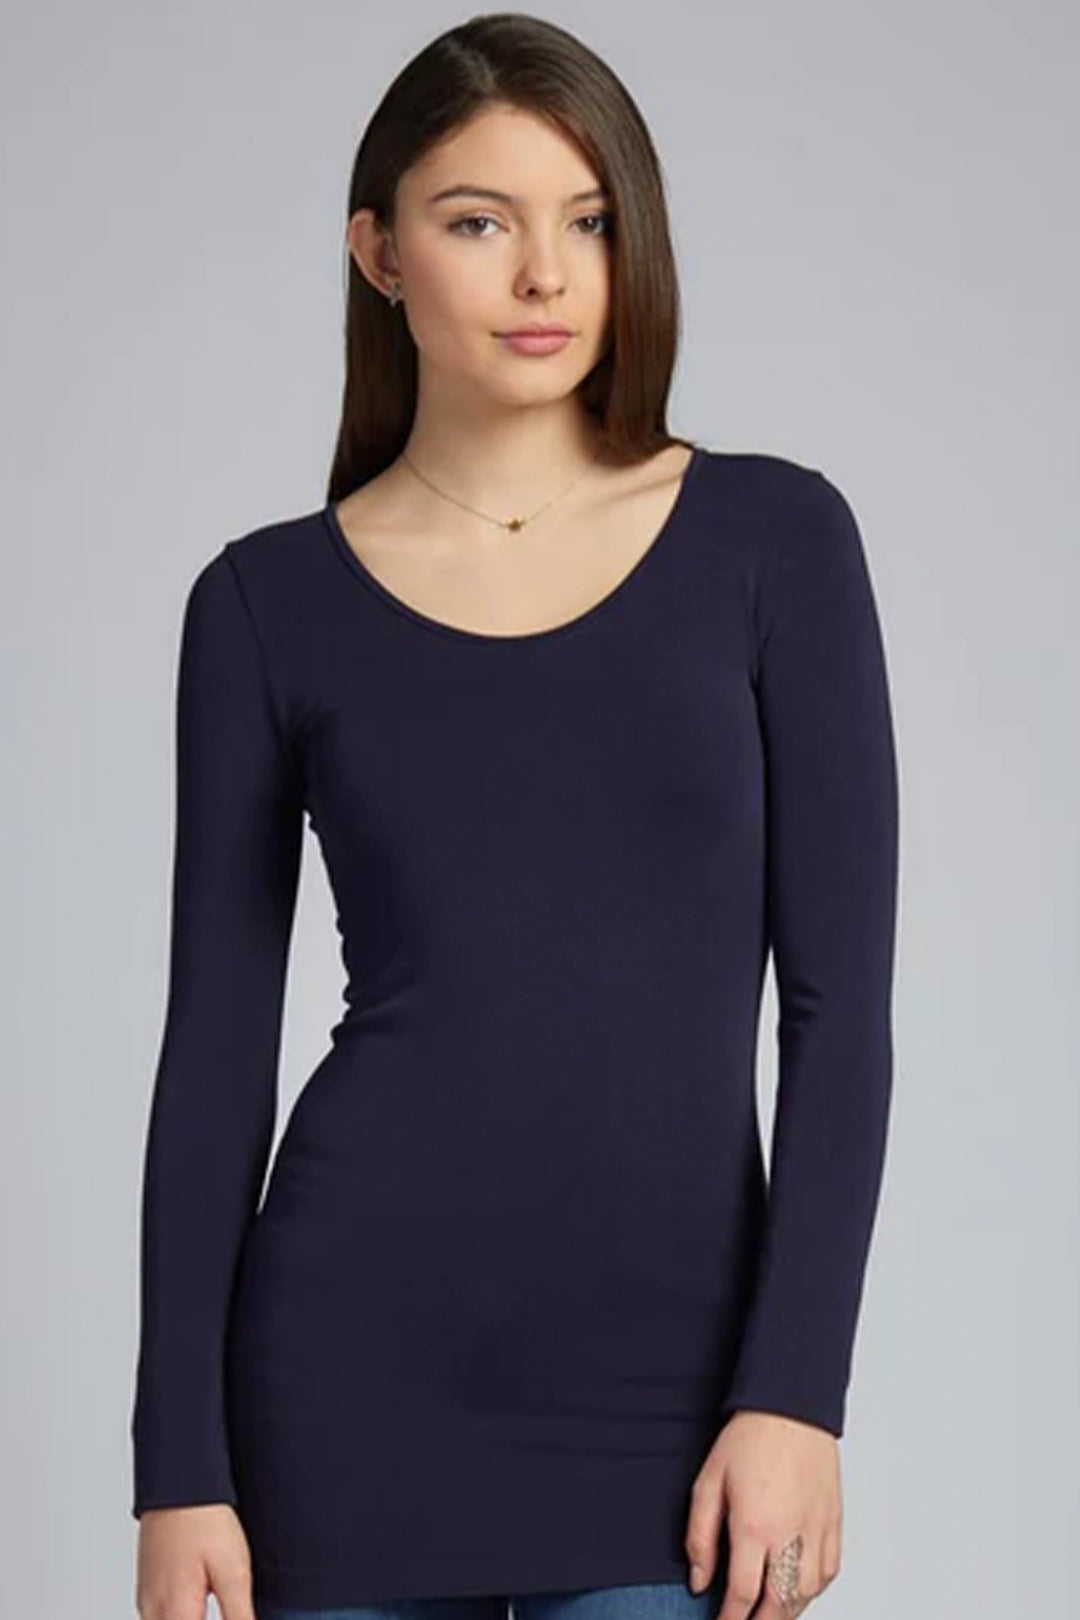 The bamboo-blend fabric offers a seamless look, is super stretchy and it will not pill. It’s the perfect layering piece!